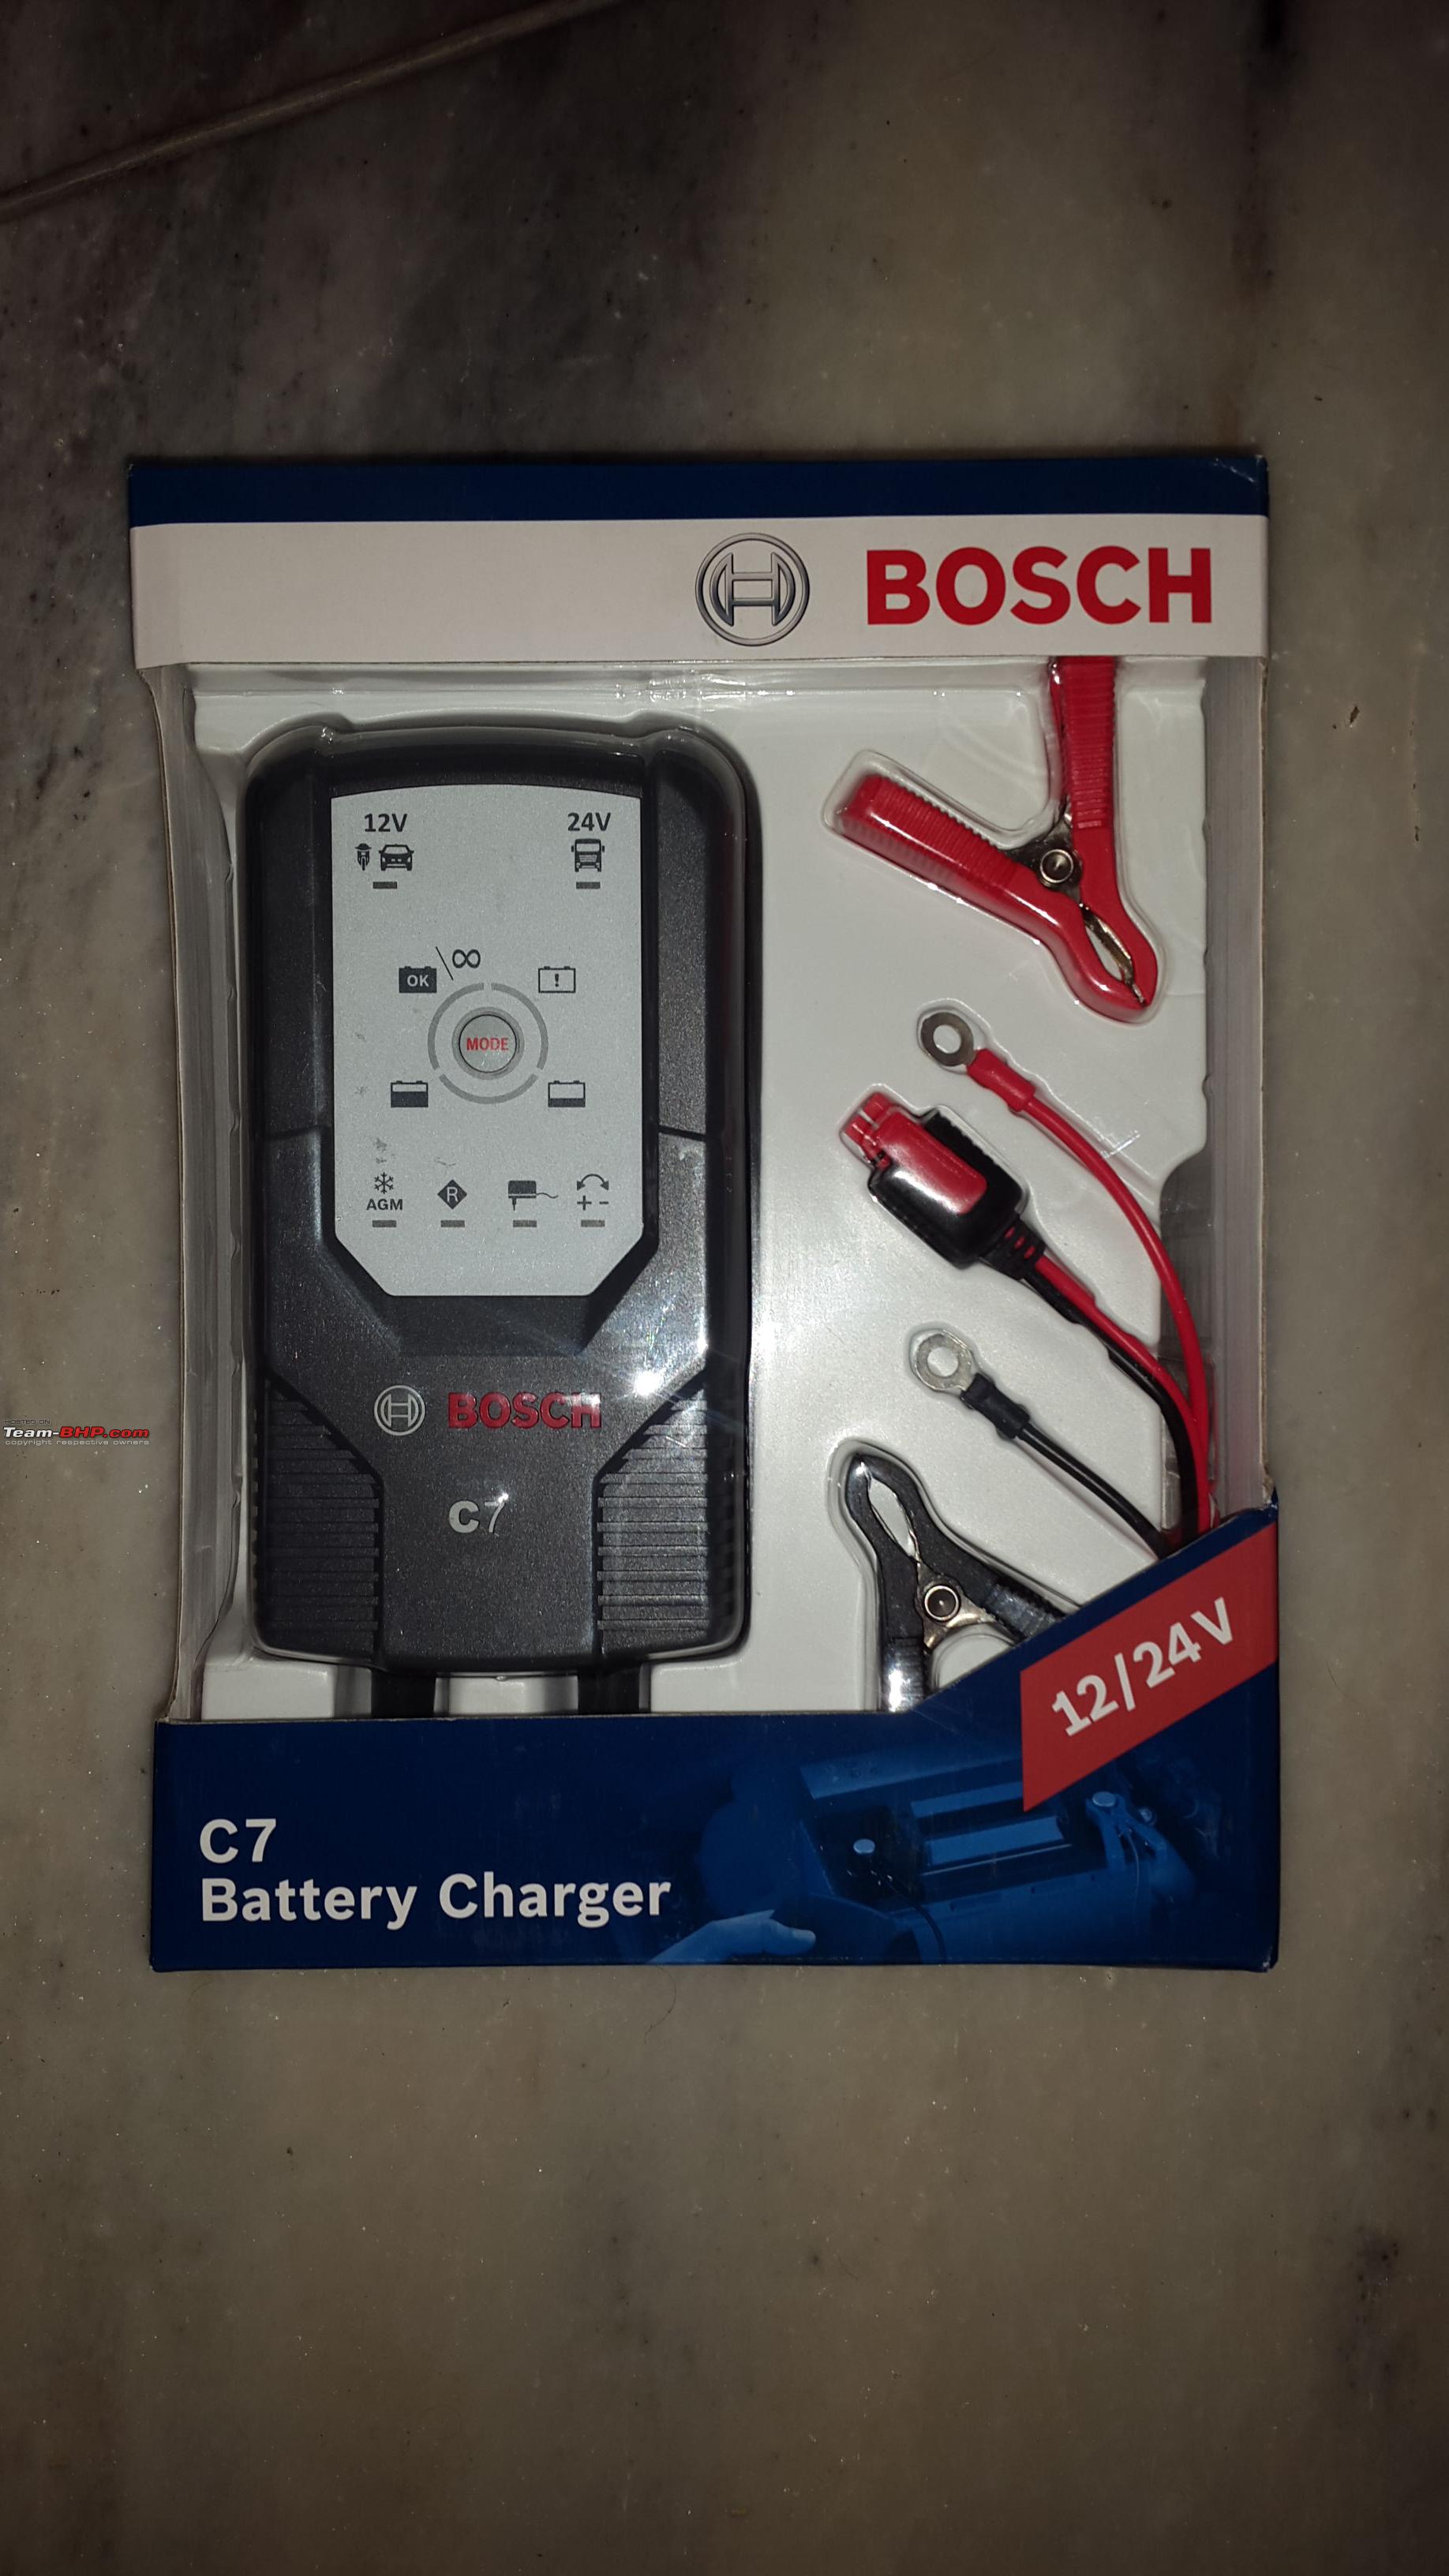 Buy Original Bosch C3 Car & Bike Battery Chargers at Best Price